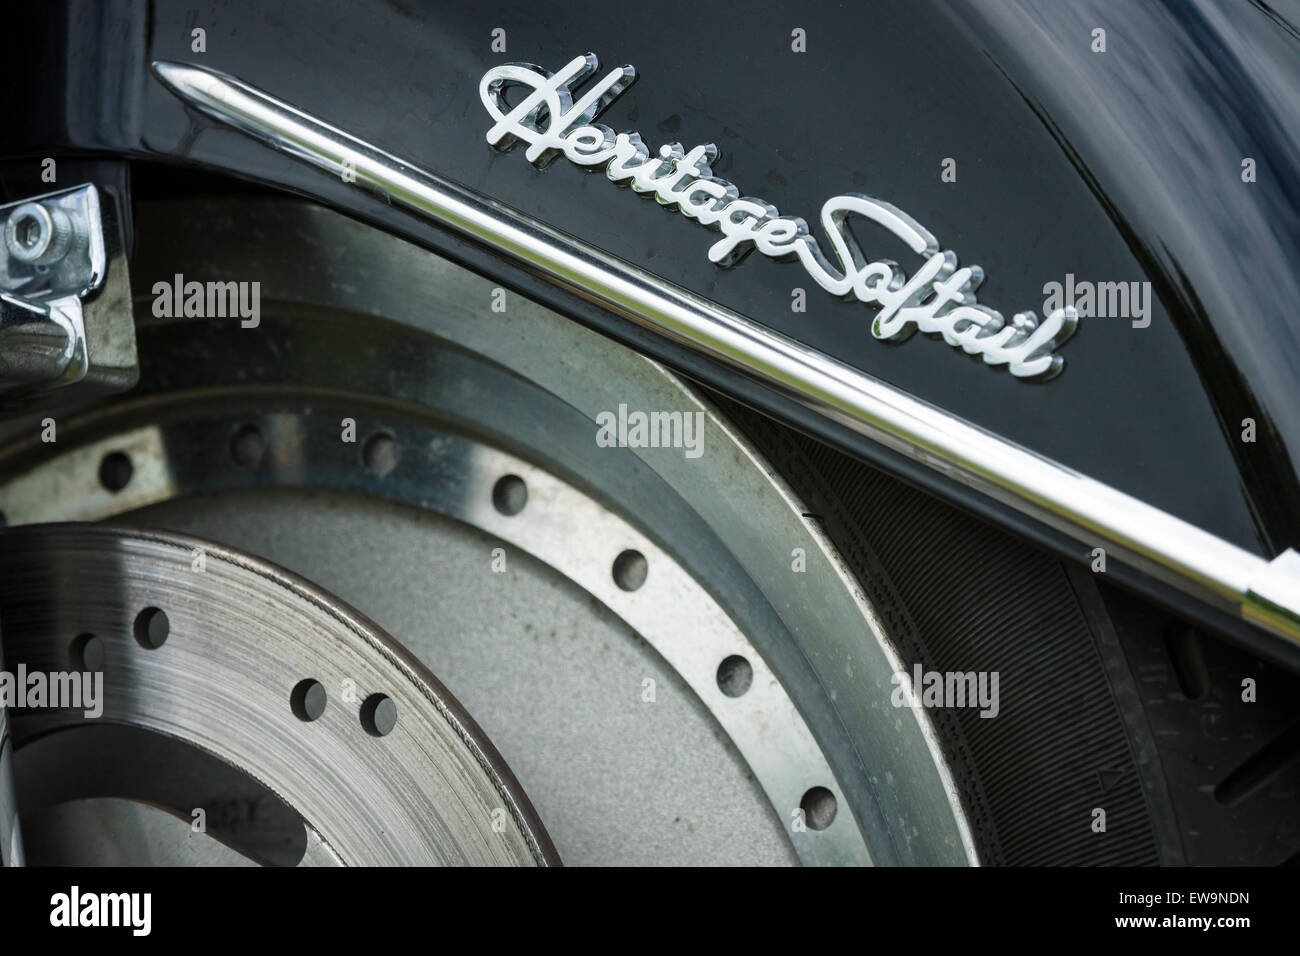 PAAREN IM GLIEN, GERMANY - MAY 23, 2015: Fragment of a motorcycle Harley-Davidson Heritage Softail. The oldtimer show in MAFZ. Stock Photo